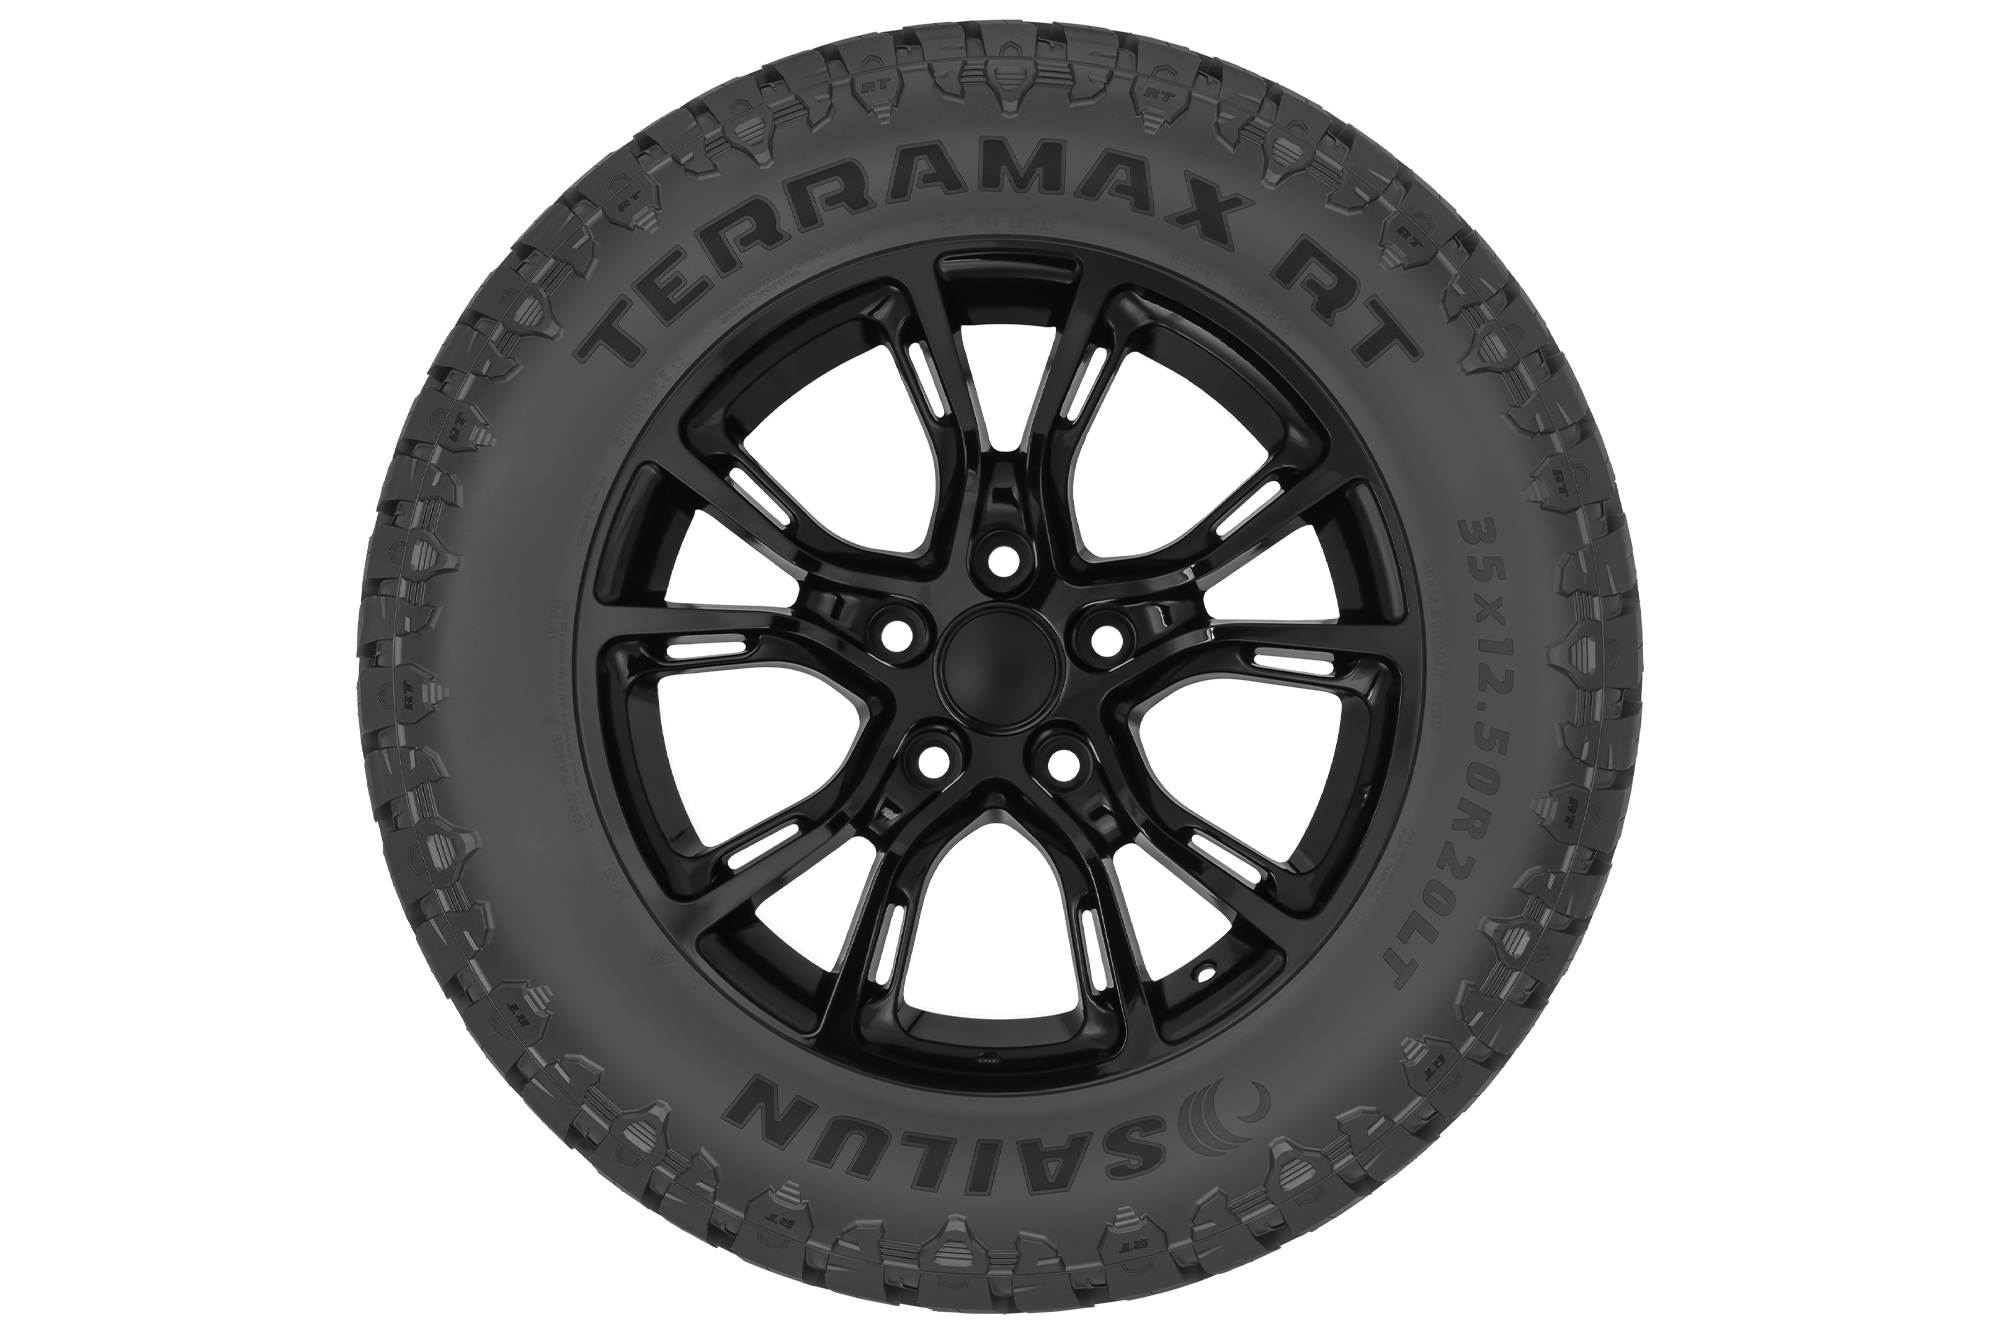 Rugged terrain tire stock photo, shot from the front